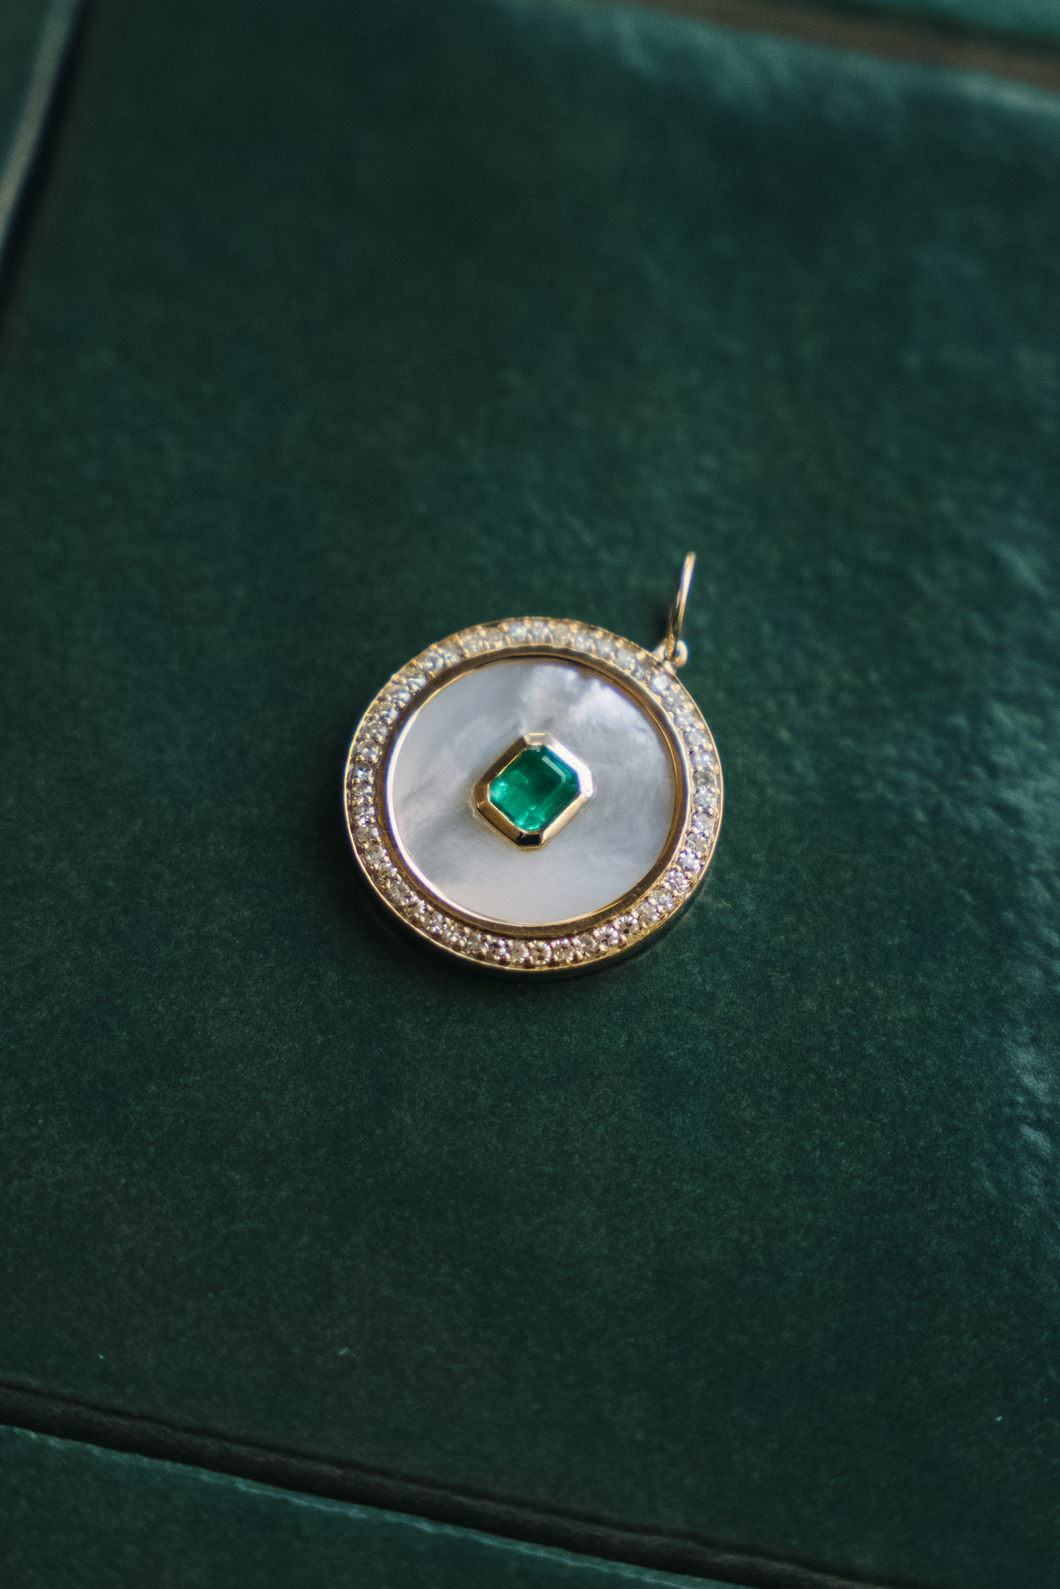 14K GOLD CHARM, EMERALD MOTHER OF PEARL PENDANT